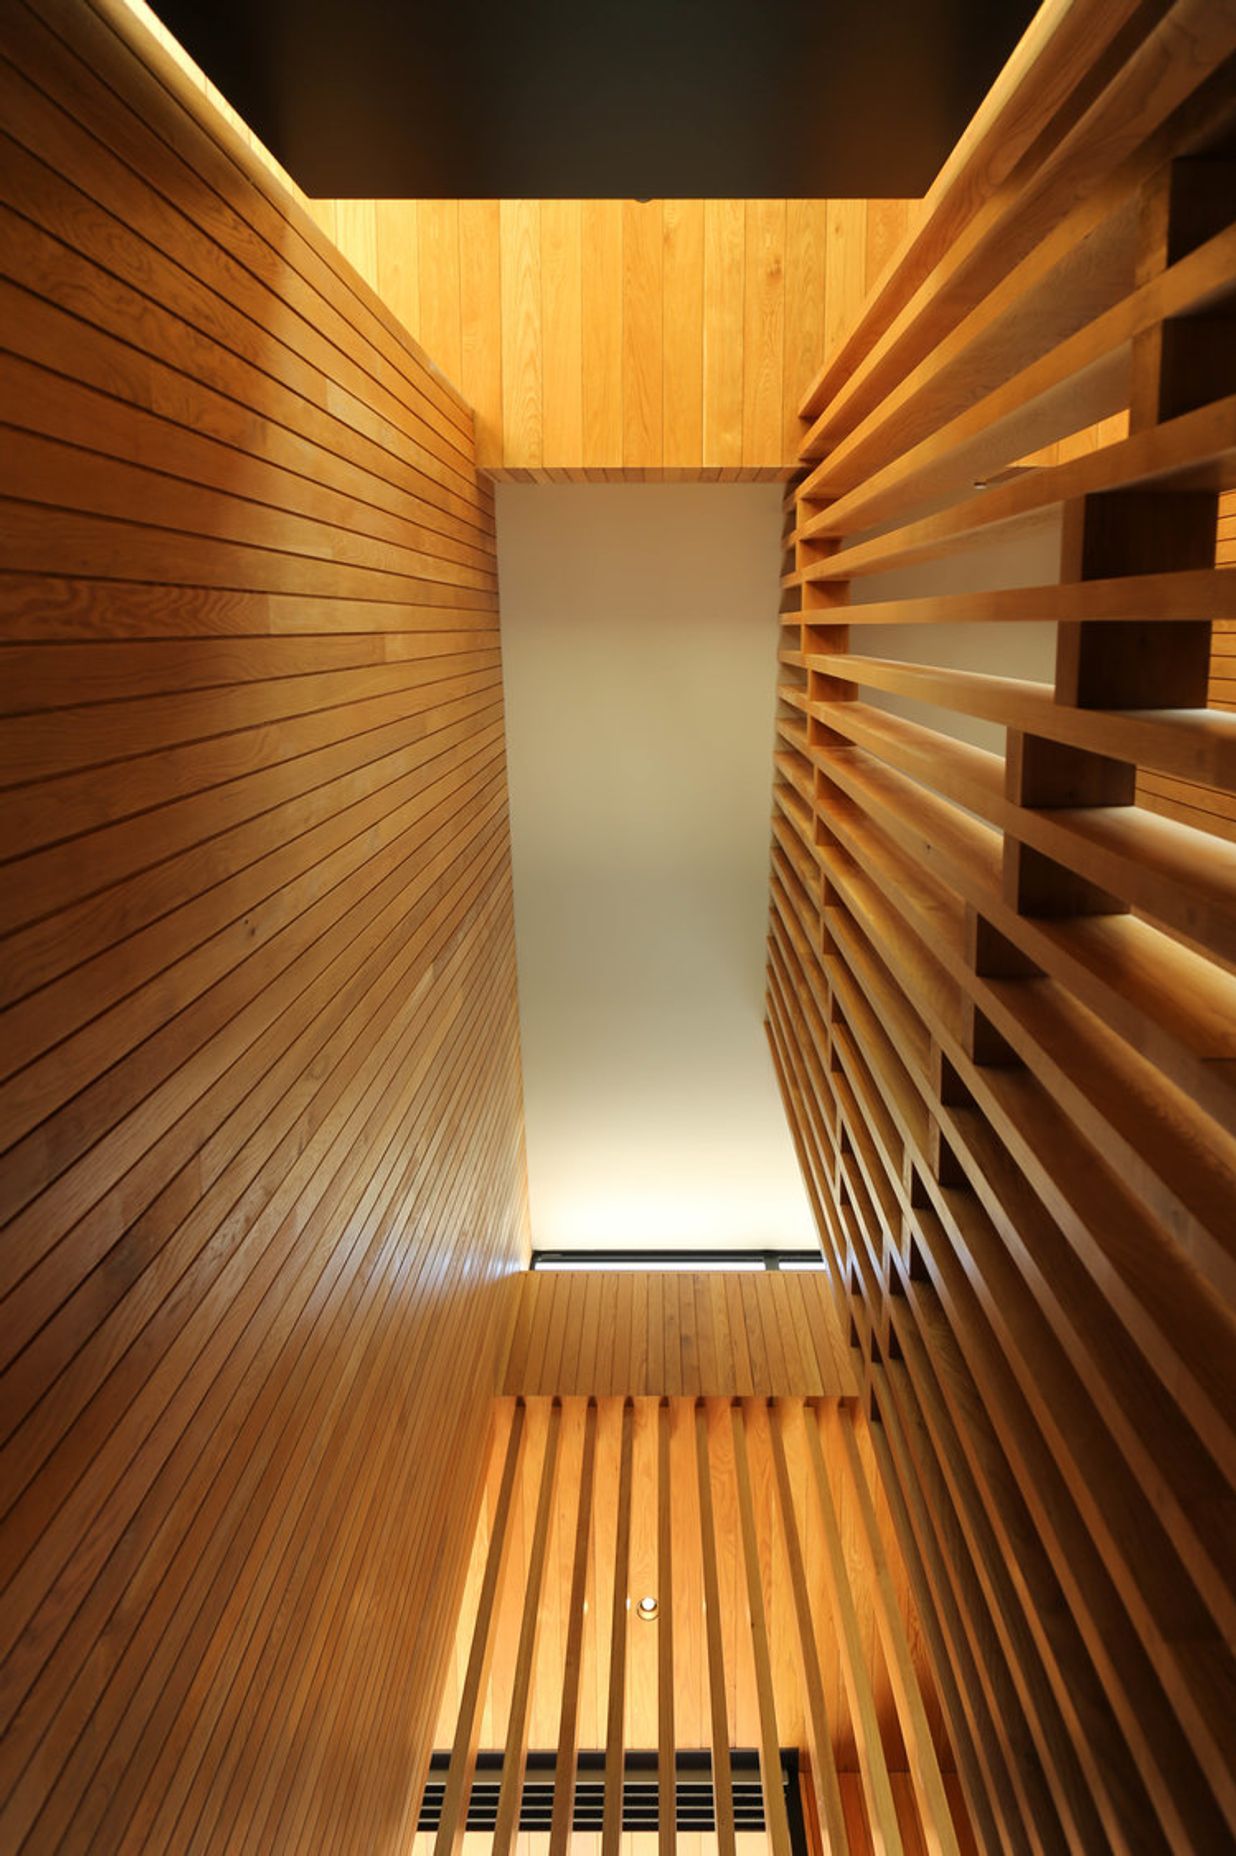 Looking up the 5m-high American oak timber staircase.